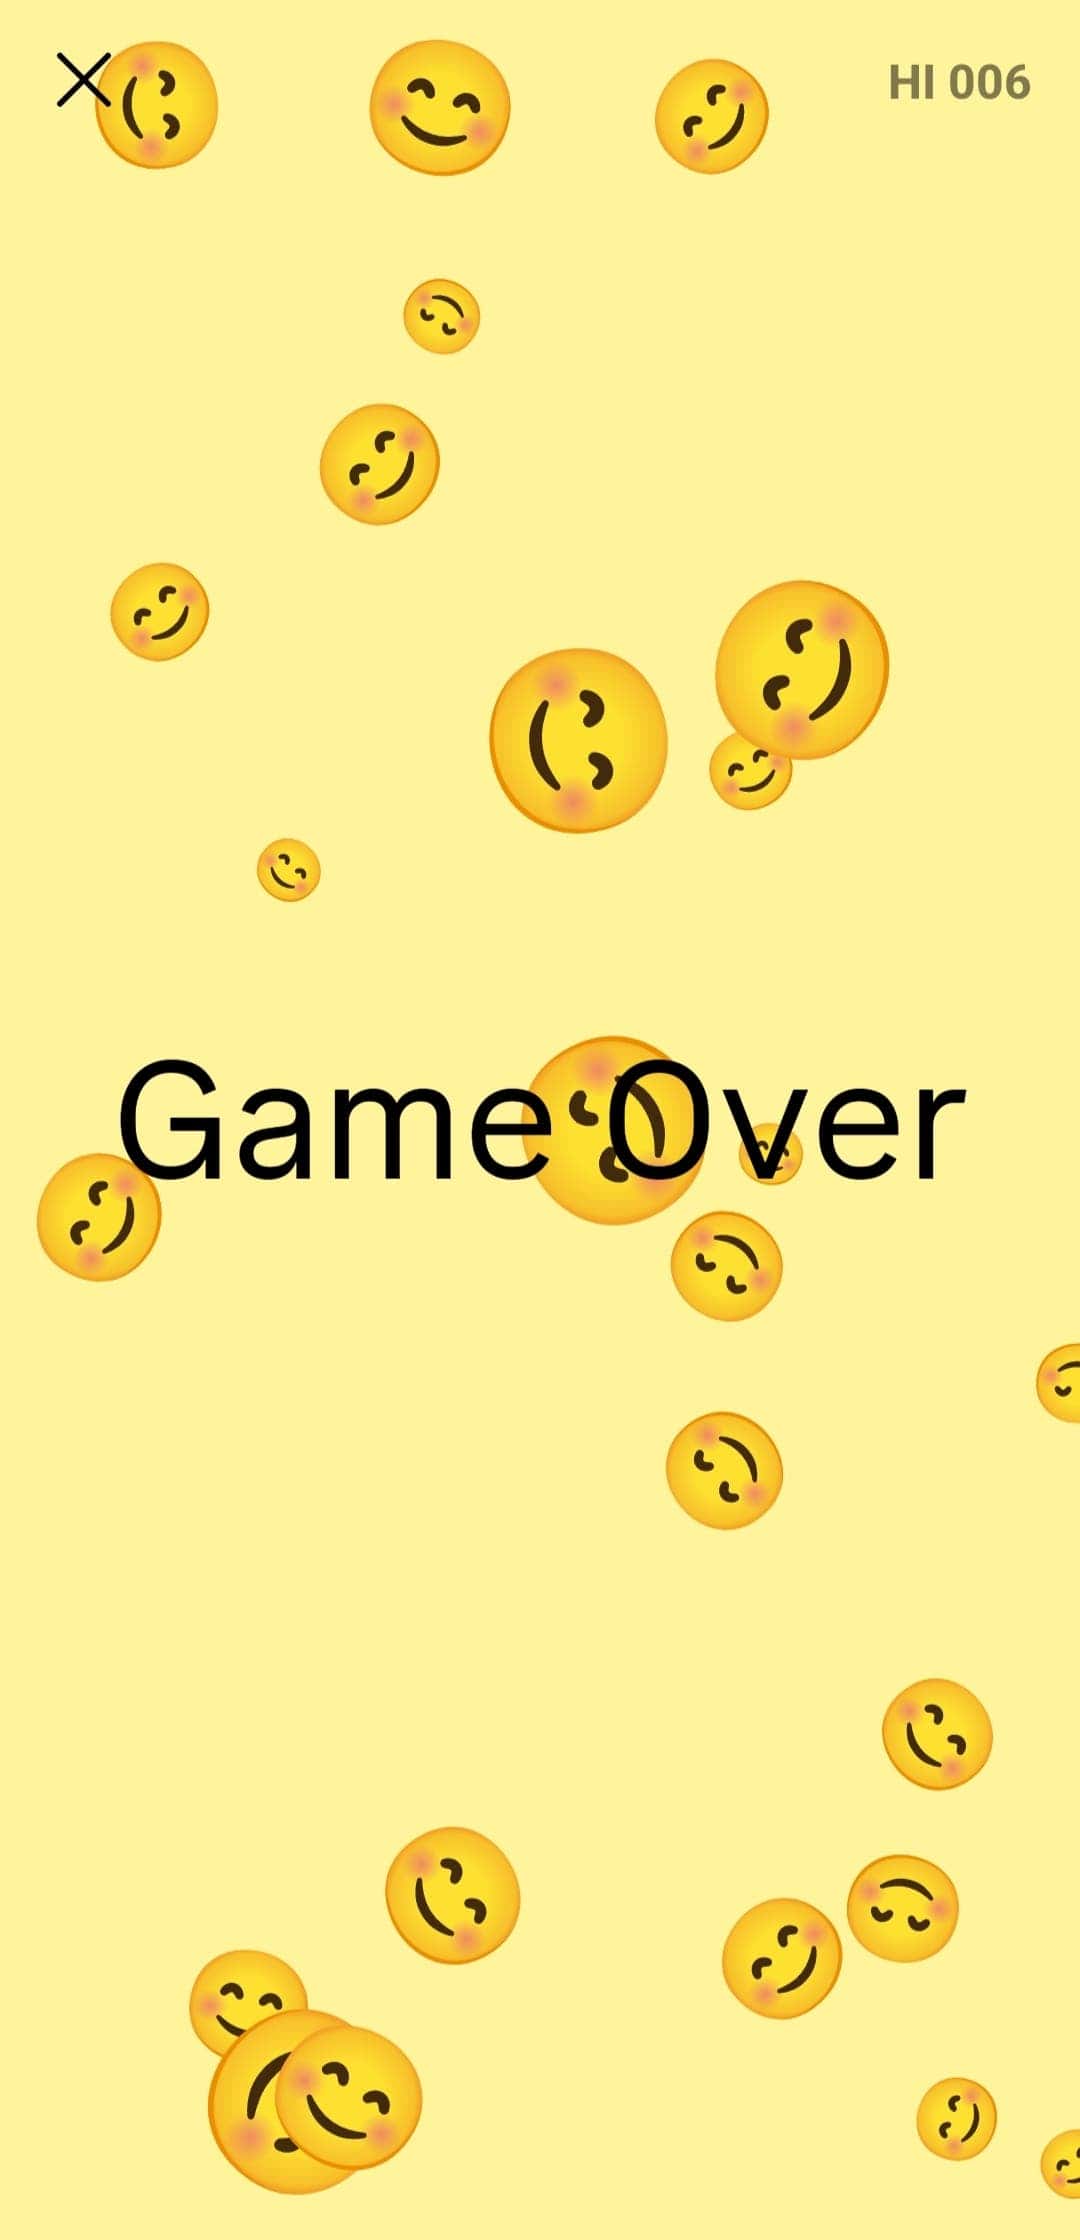 Instagram Pong Game - Game Over